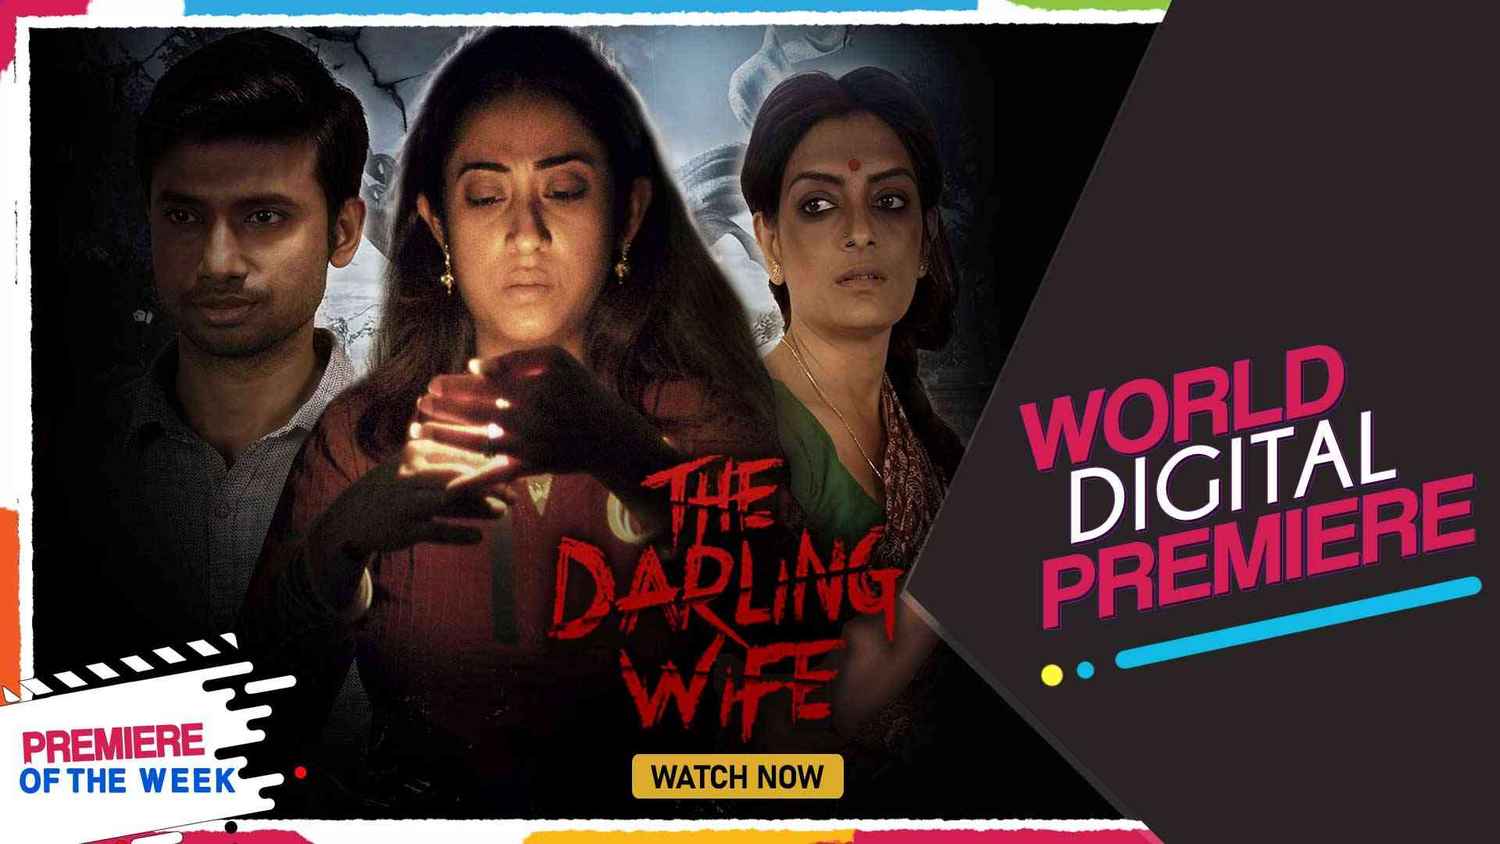 The Darling Wife